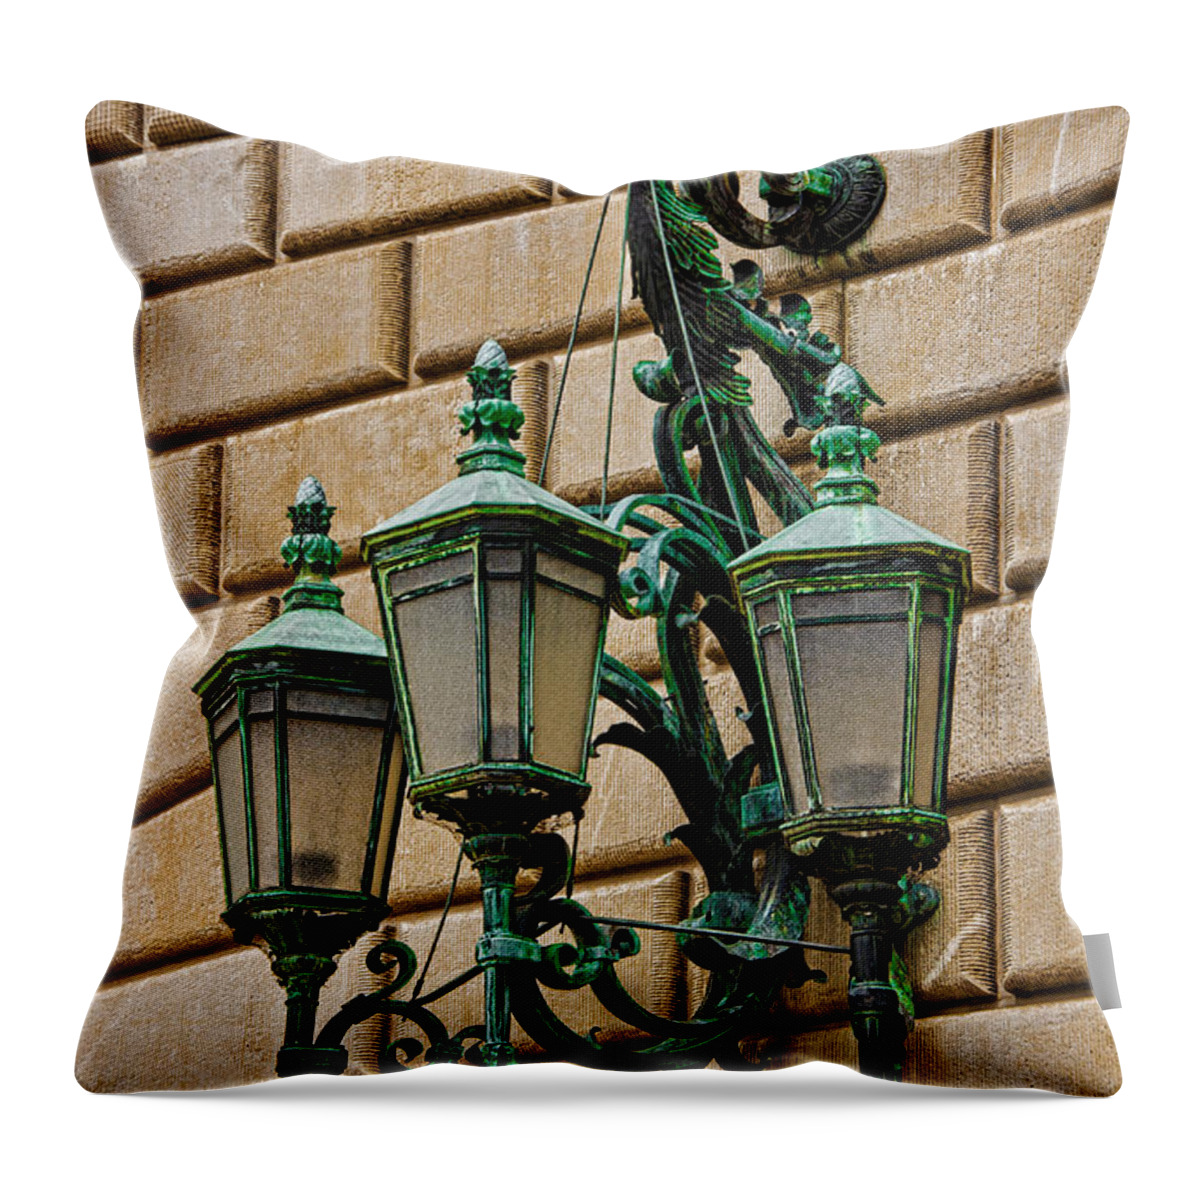 Light Throw Pillow featuring the photograph Old Brass Lighting by Christopher Holmes